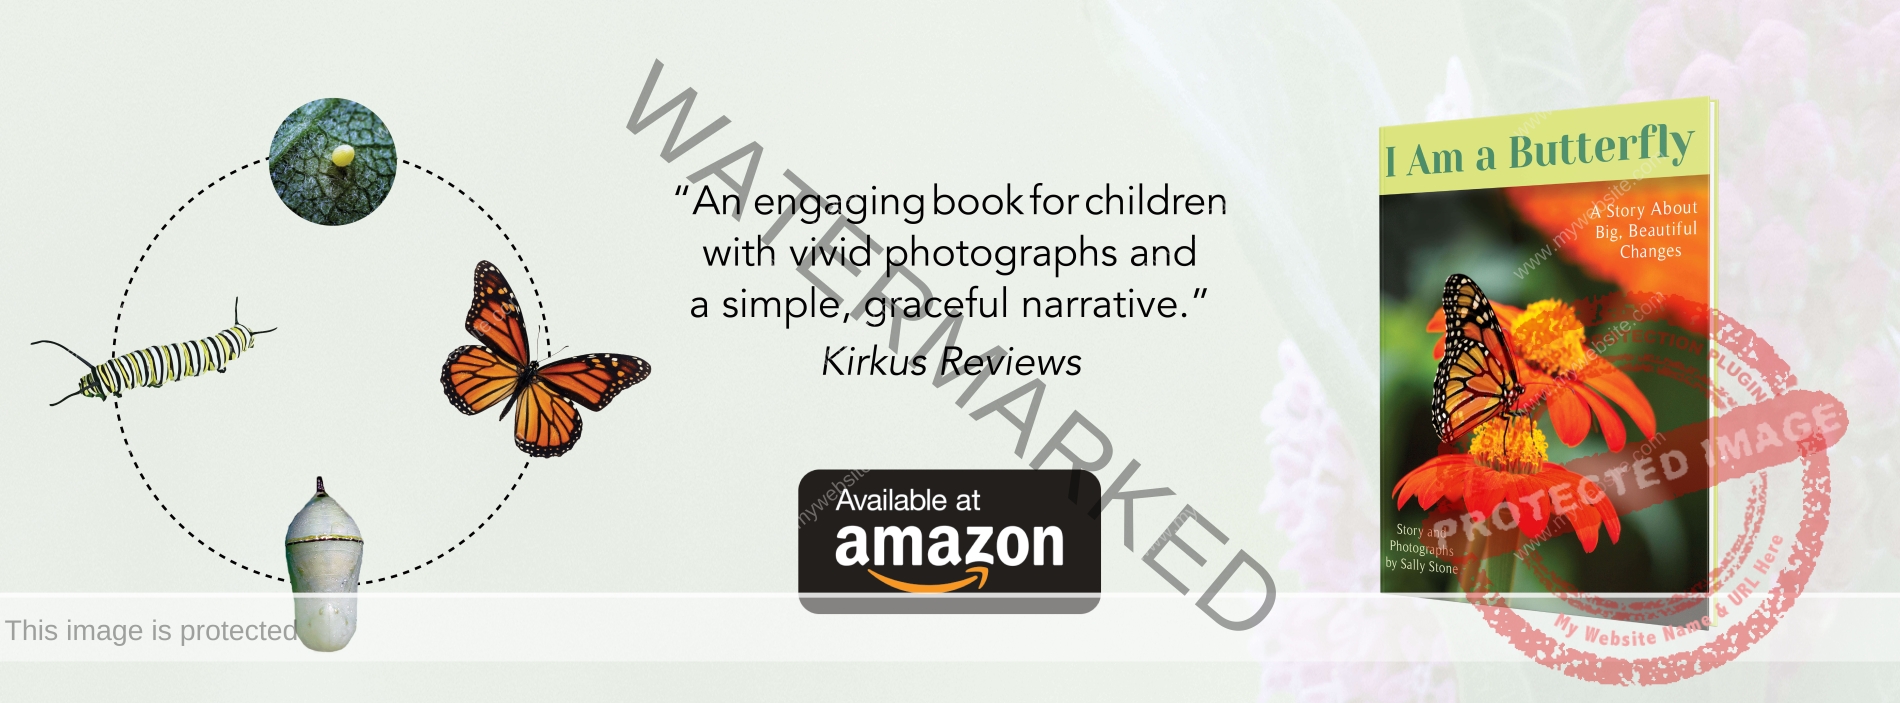 Website-Banner-I-Am-a-Butterfly-WHOLESALE-BOOKS